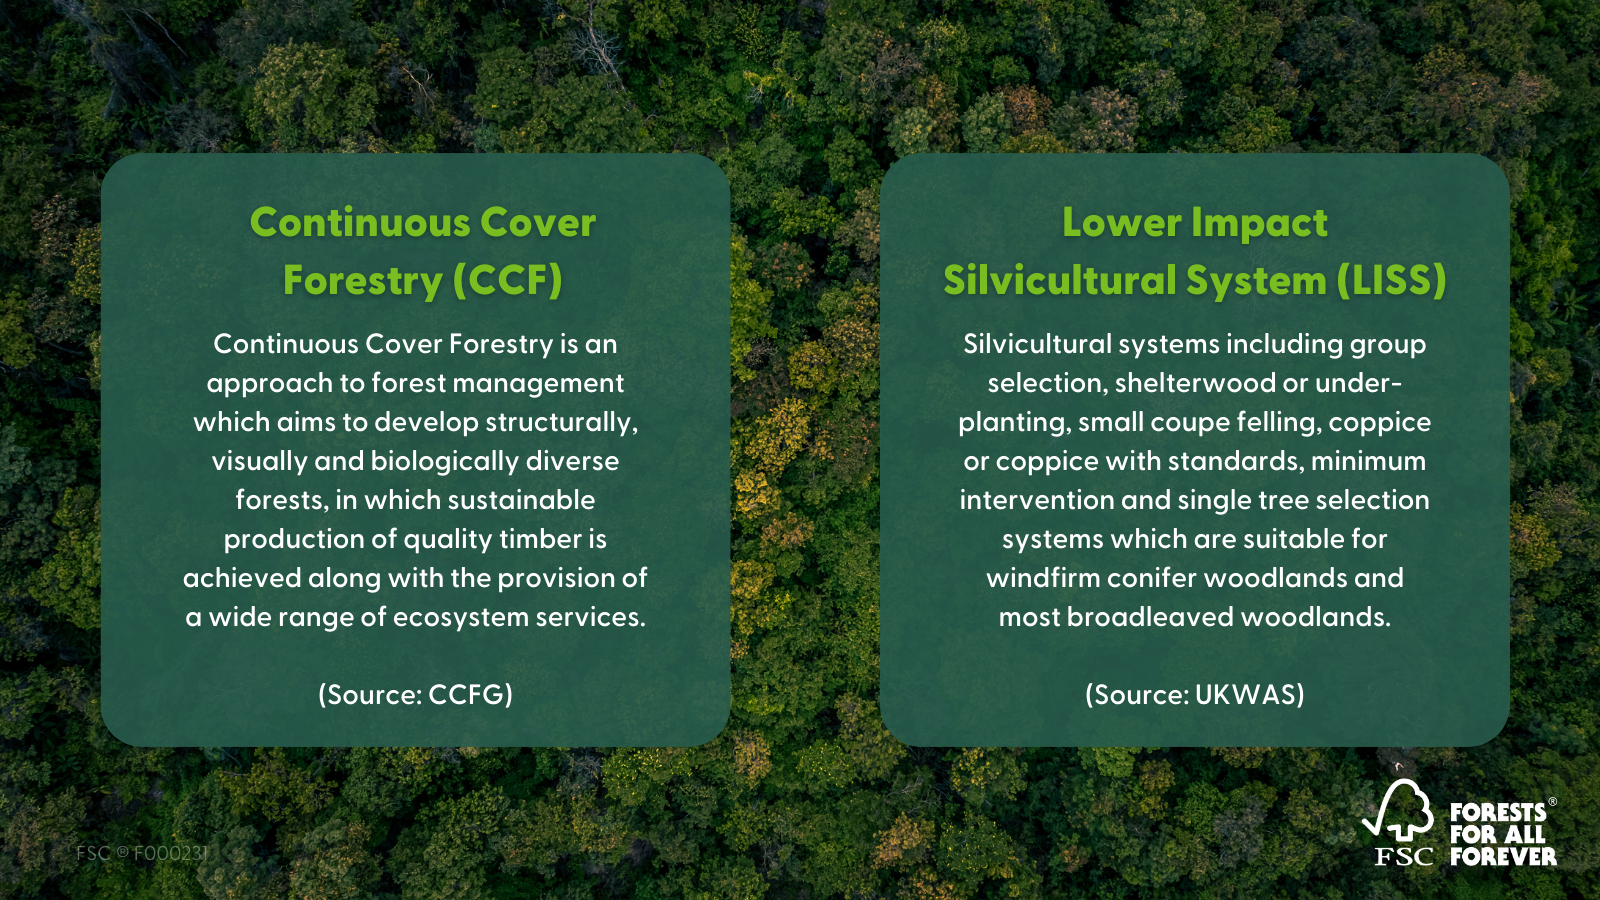 Image with definitions of Continuous Cover Forestry (Continuous Cover Forestry is an approach to forest management which aims to develop structurally, visually and biologically diverse forests, in which sustainable production of quality timber is achieved along with the provision of a wide range of ecosystem services.) and Lower Impact Silvicultural Systems (Silvicultural systems including group selection, shelterwood or under-planting, small coupe felling, coppice or coppice with standards, minimum intervention and single tree selection systems which are suitable for windfirm conifer woodlands and most broadleaved woodlands.)